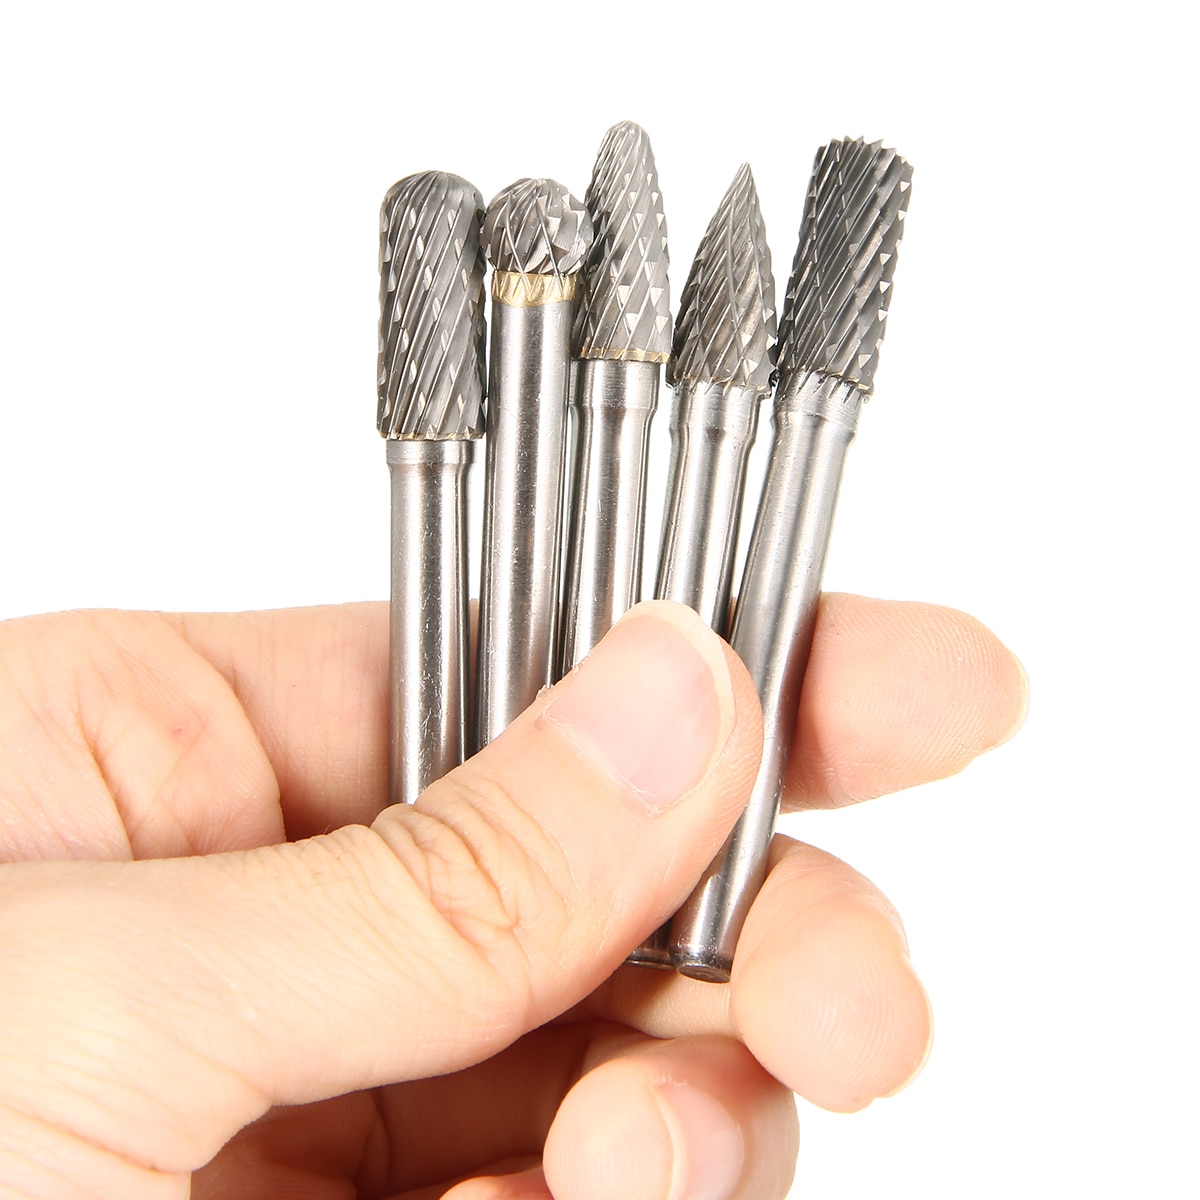 New 5pcs Tungsten Carbide 8mm Rotary Point Burrs Electric Grinder 6mm Shank Bits Set For Finishing Metal Molds Processing